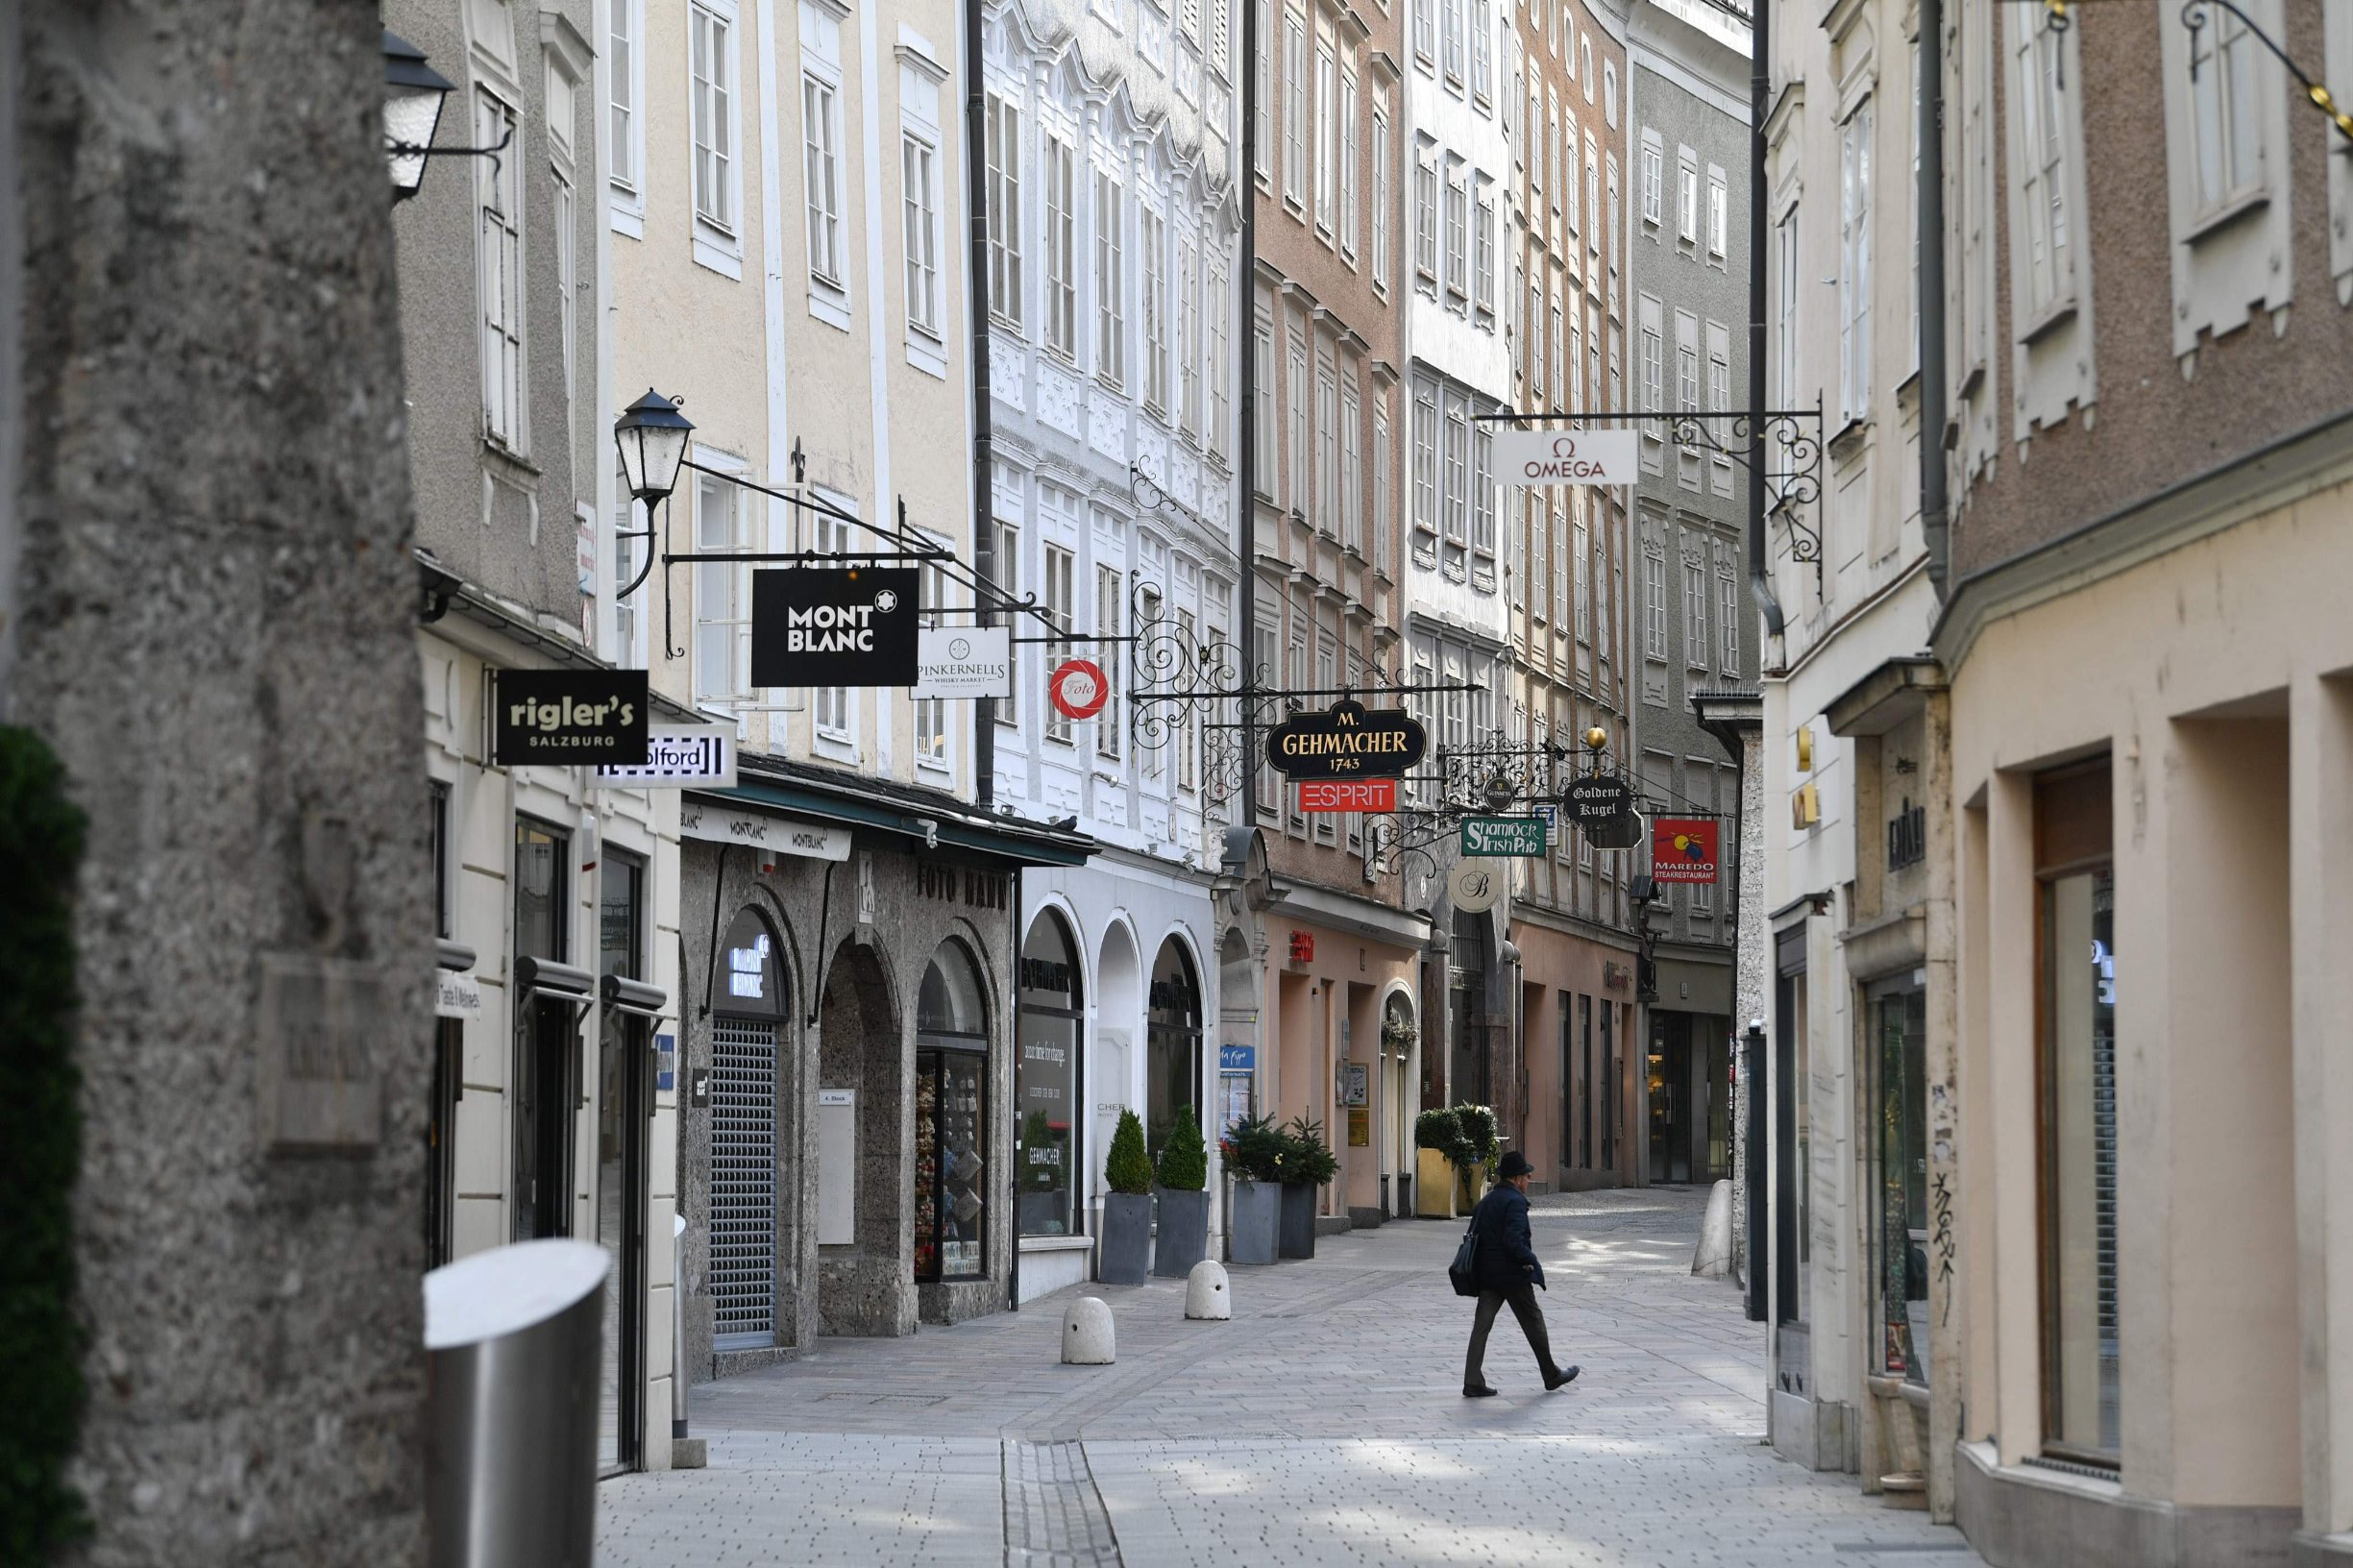 A man walks on March 17, 2020 through the Getreidegasse street in the historical centre of Salzburg, Austria, where touristic activities came to a halt due to the spread of the novel coronavirus. (Photo by BARBARA GINDL / APA / AFP) / Austria OUT